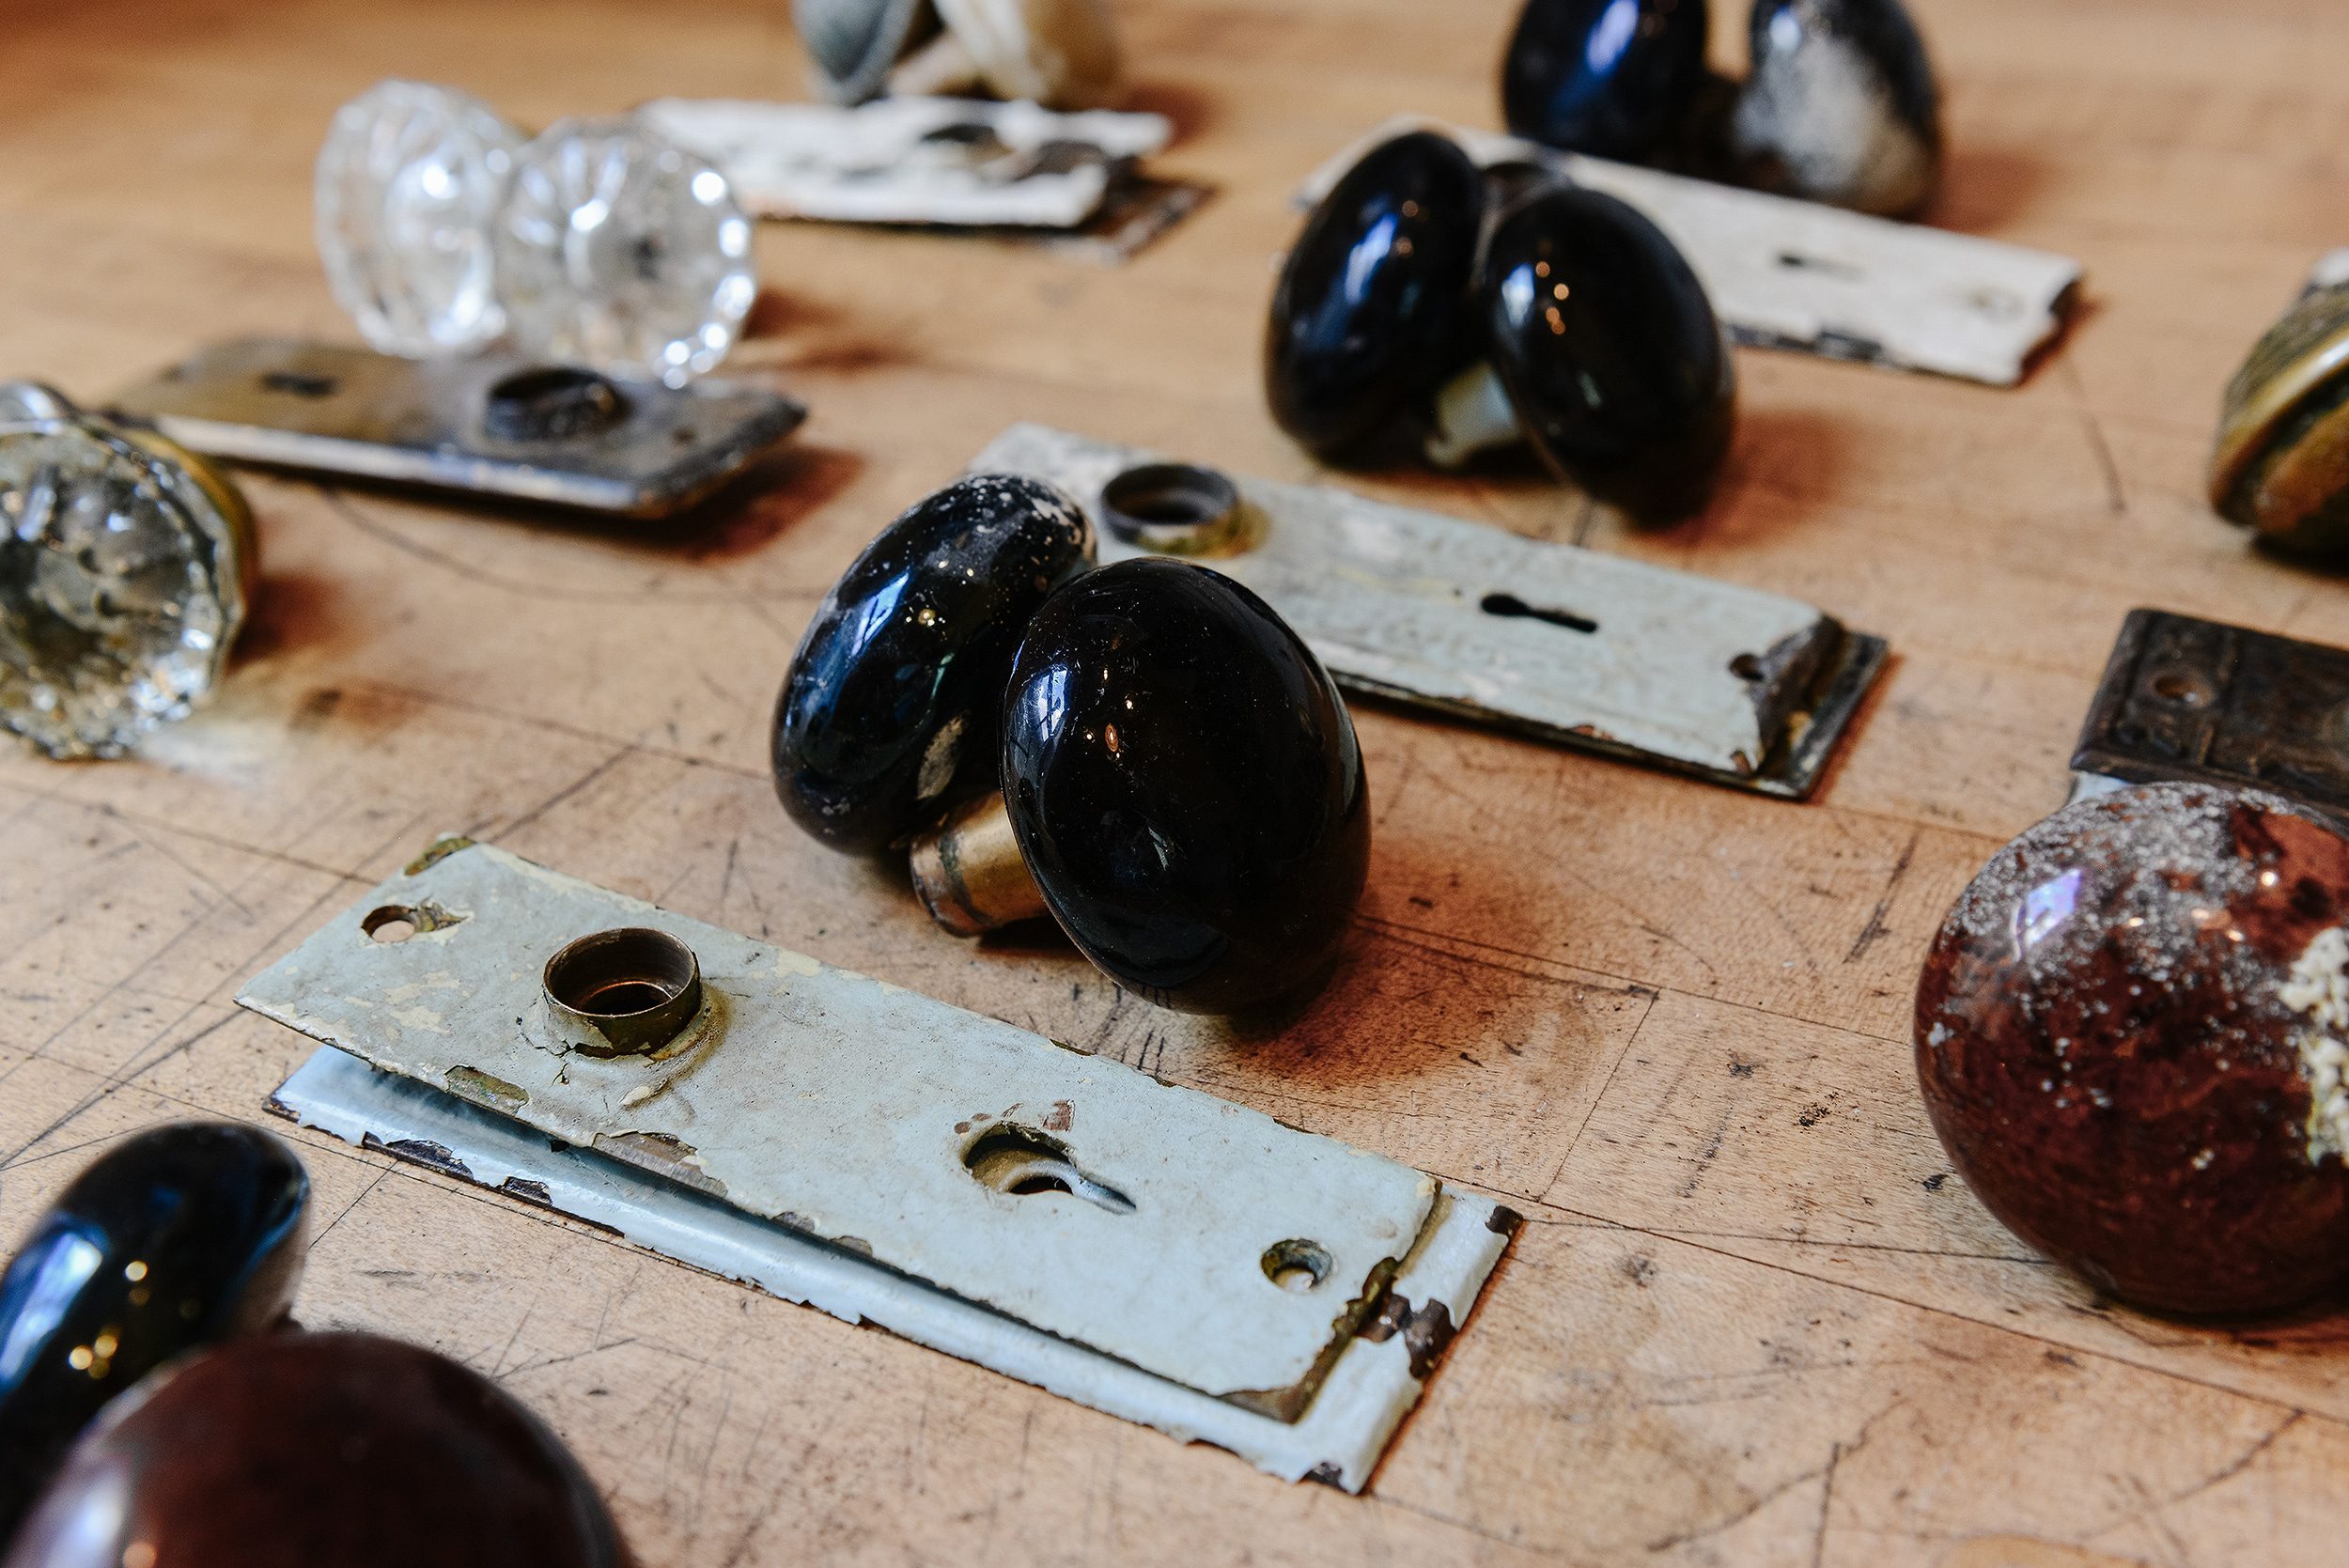 All the old hardware lined up, waiting to be boiled in the crockpot to remove decades of yucky paint | via Yellow Brick Home